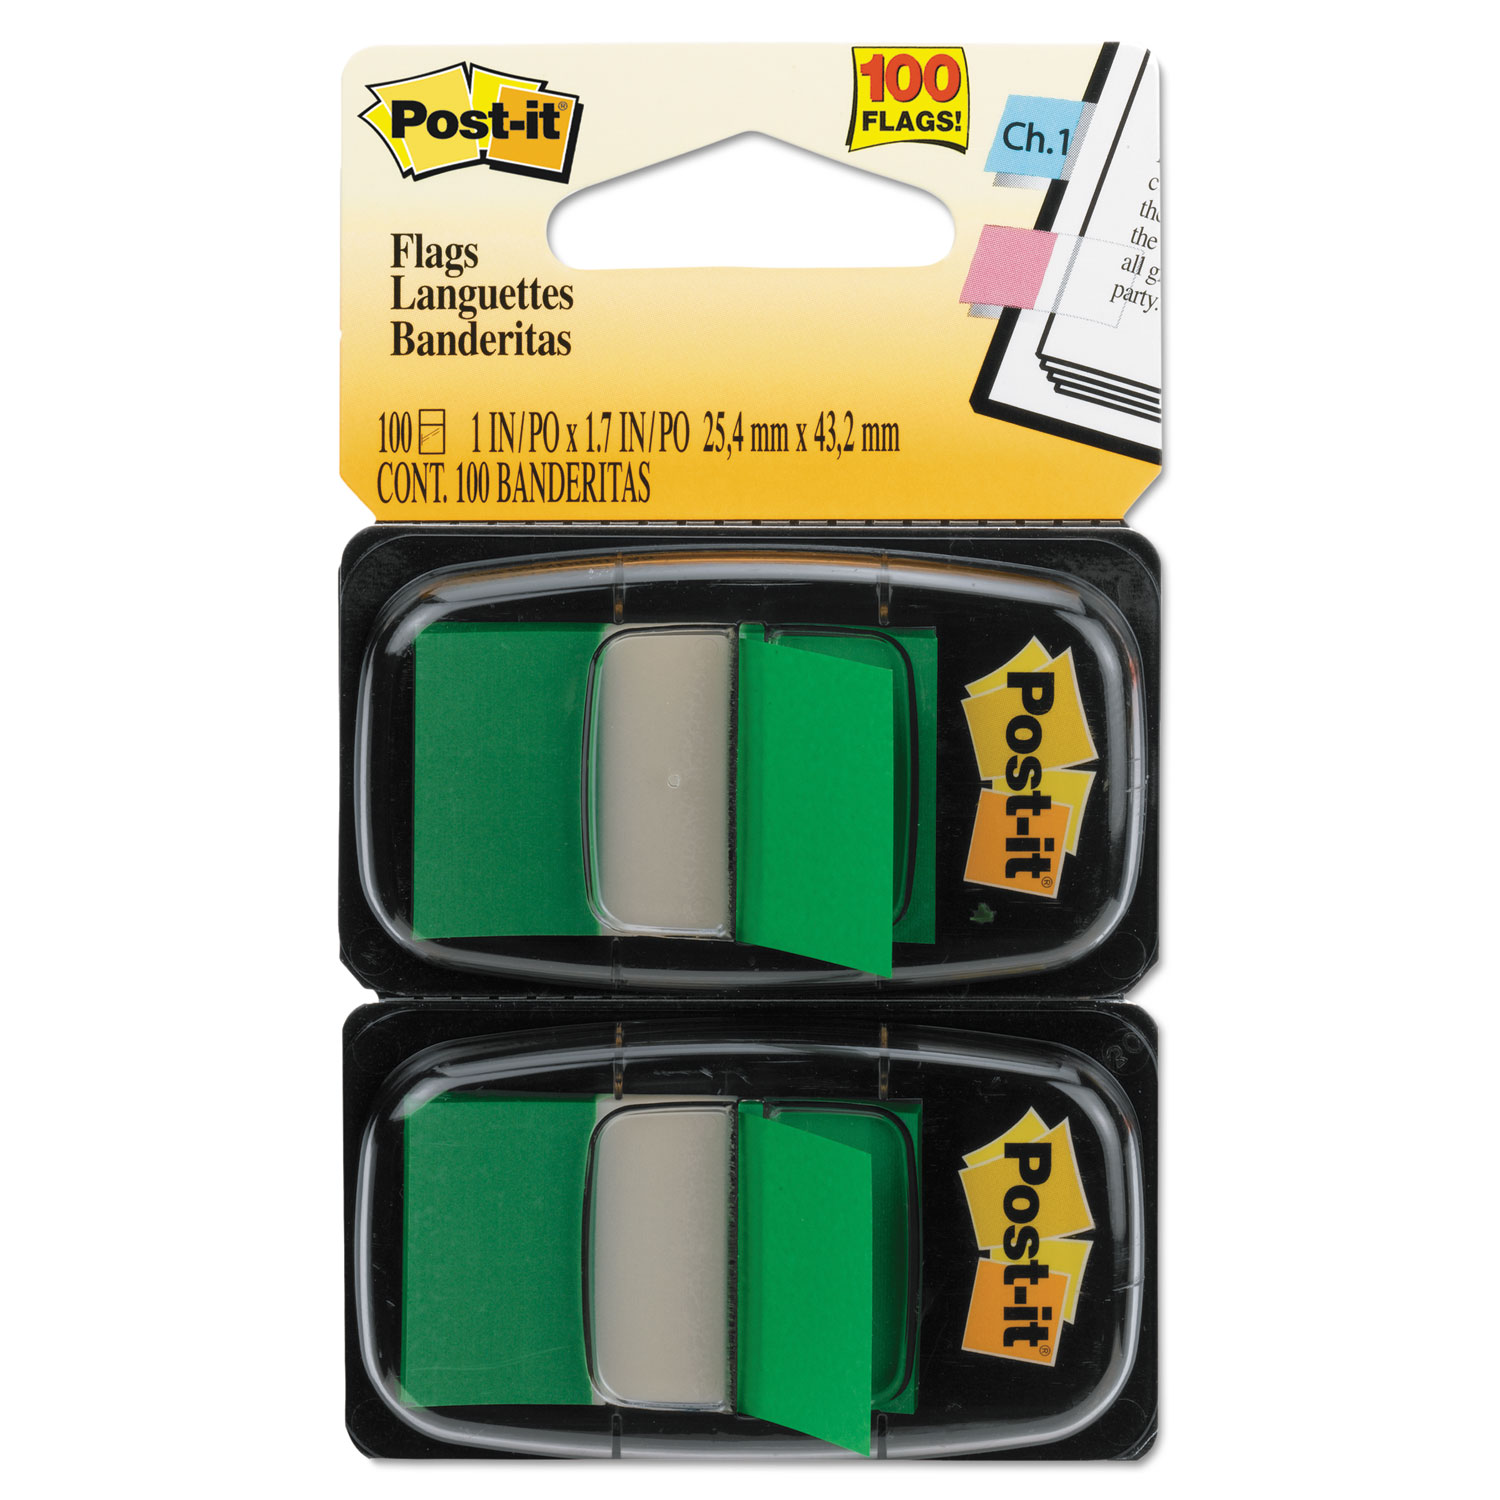  Post-it Flags 680-GN2 Standard Page Flags in Dispenser, Green, 100 Flags/Dispenser (MMM680GN2) 